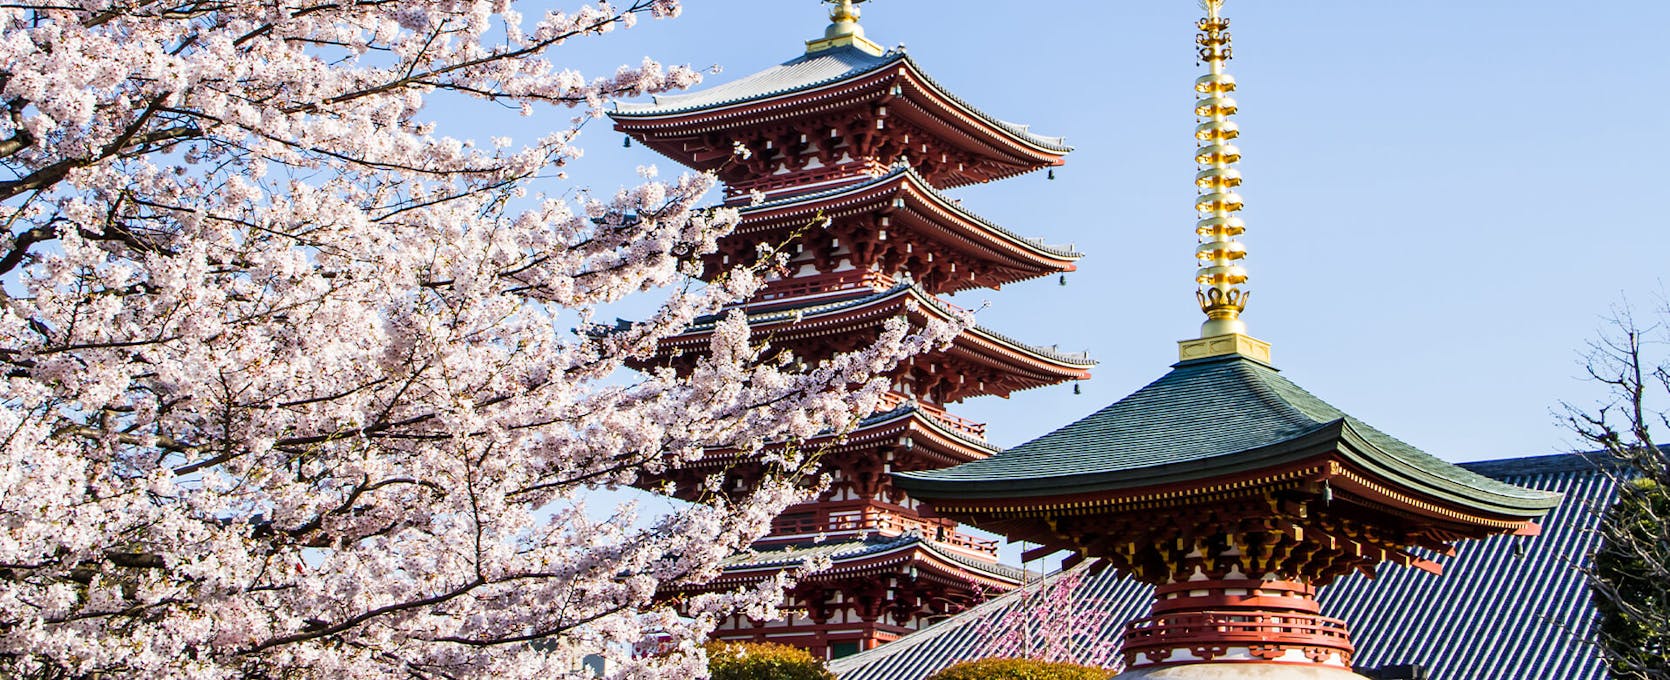 Japanese buildings with cherry blossom trees